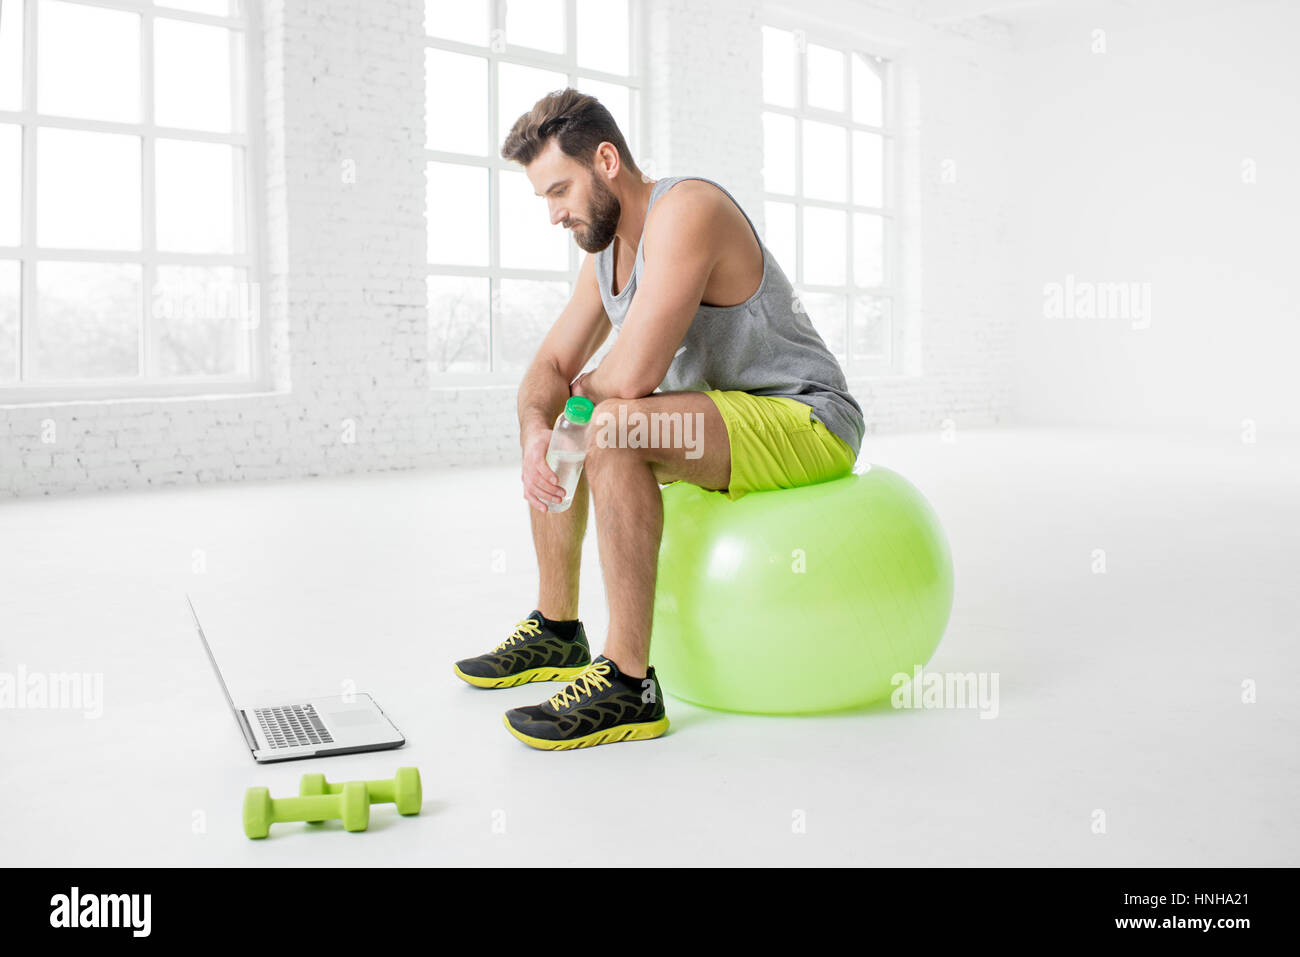 fitball online